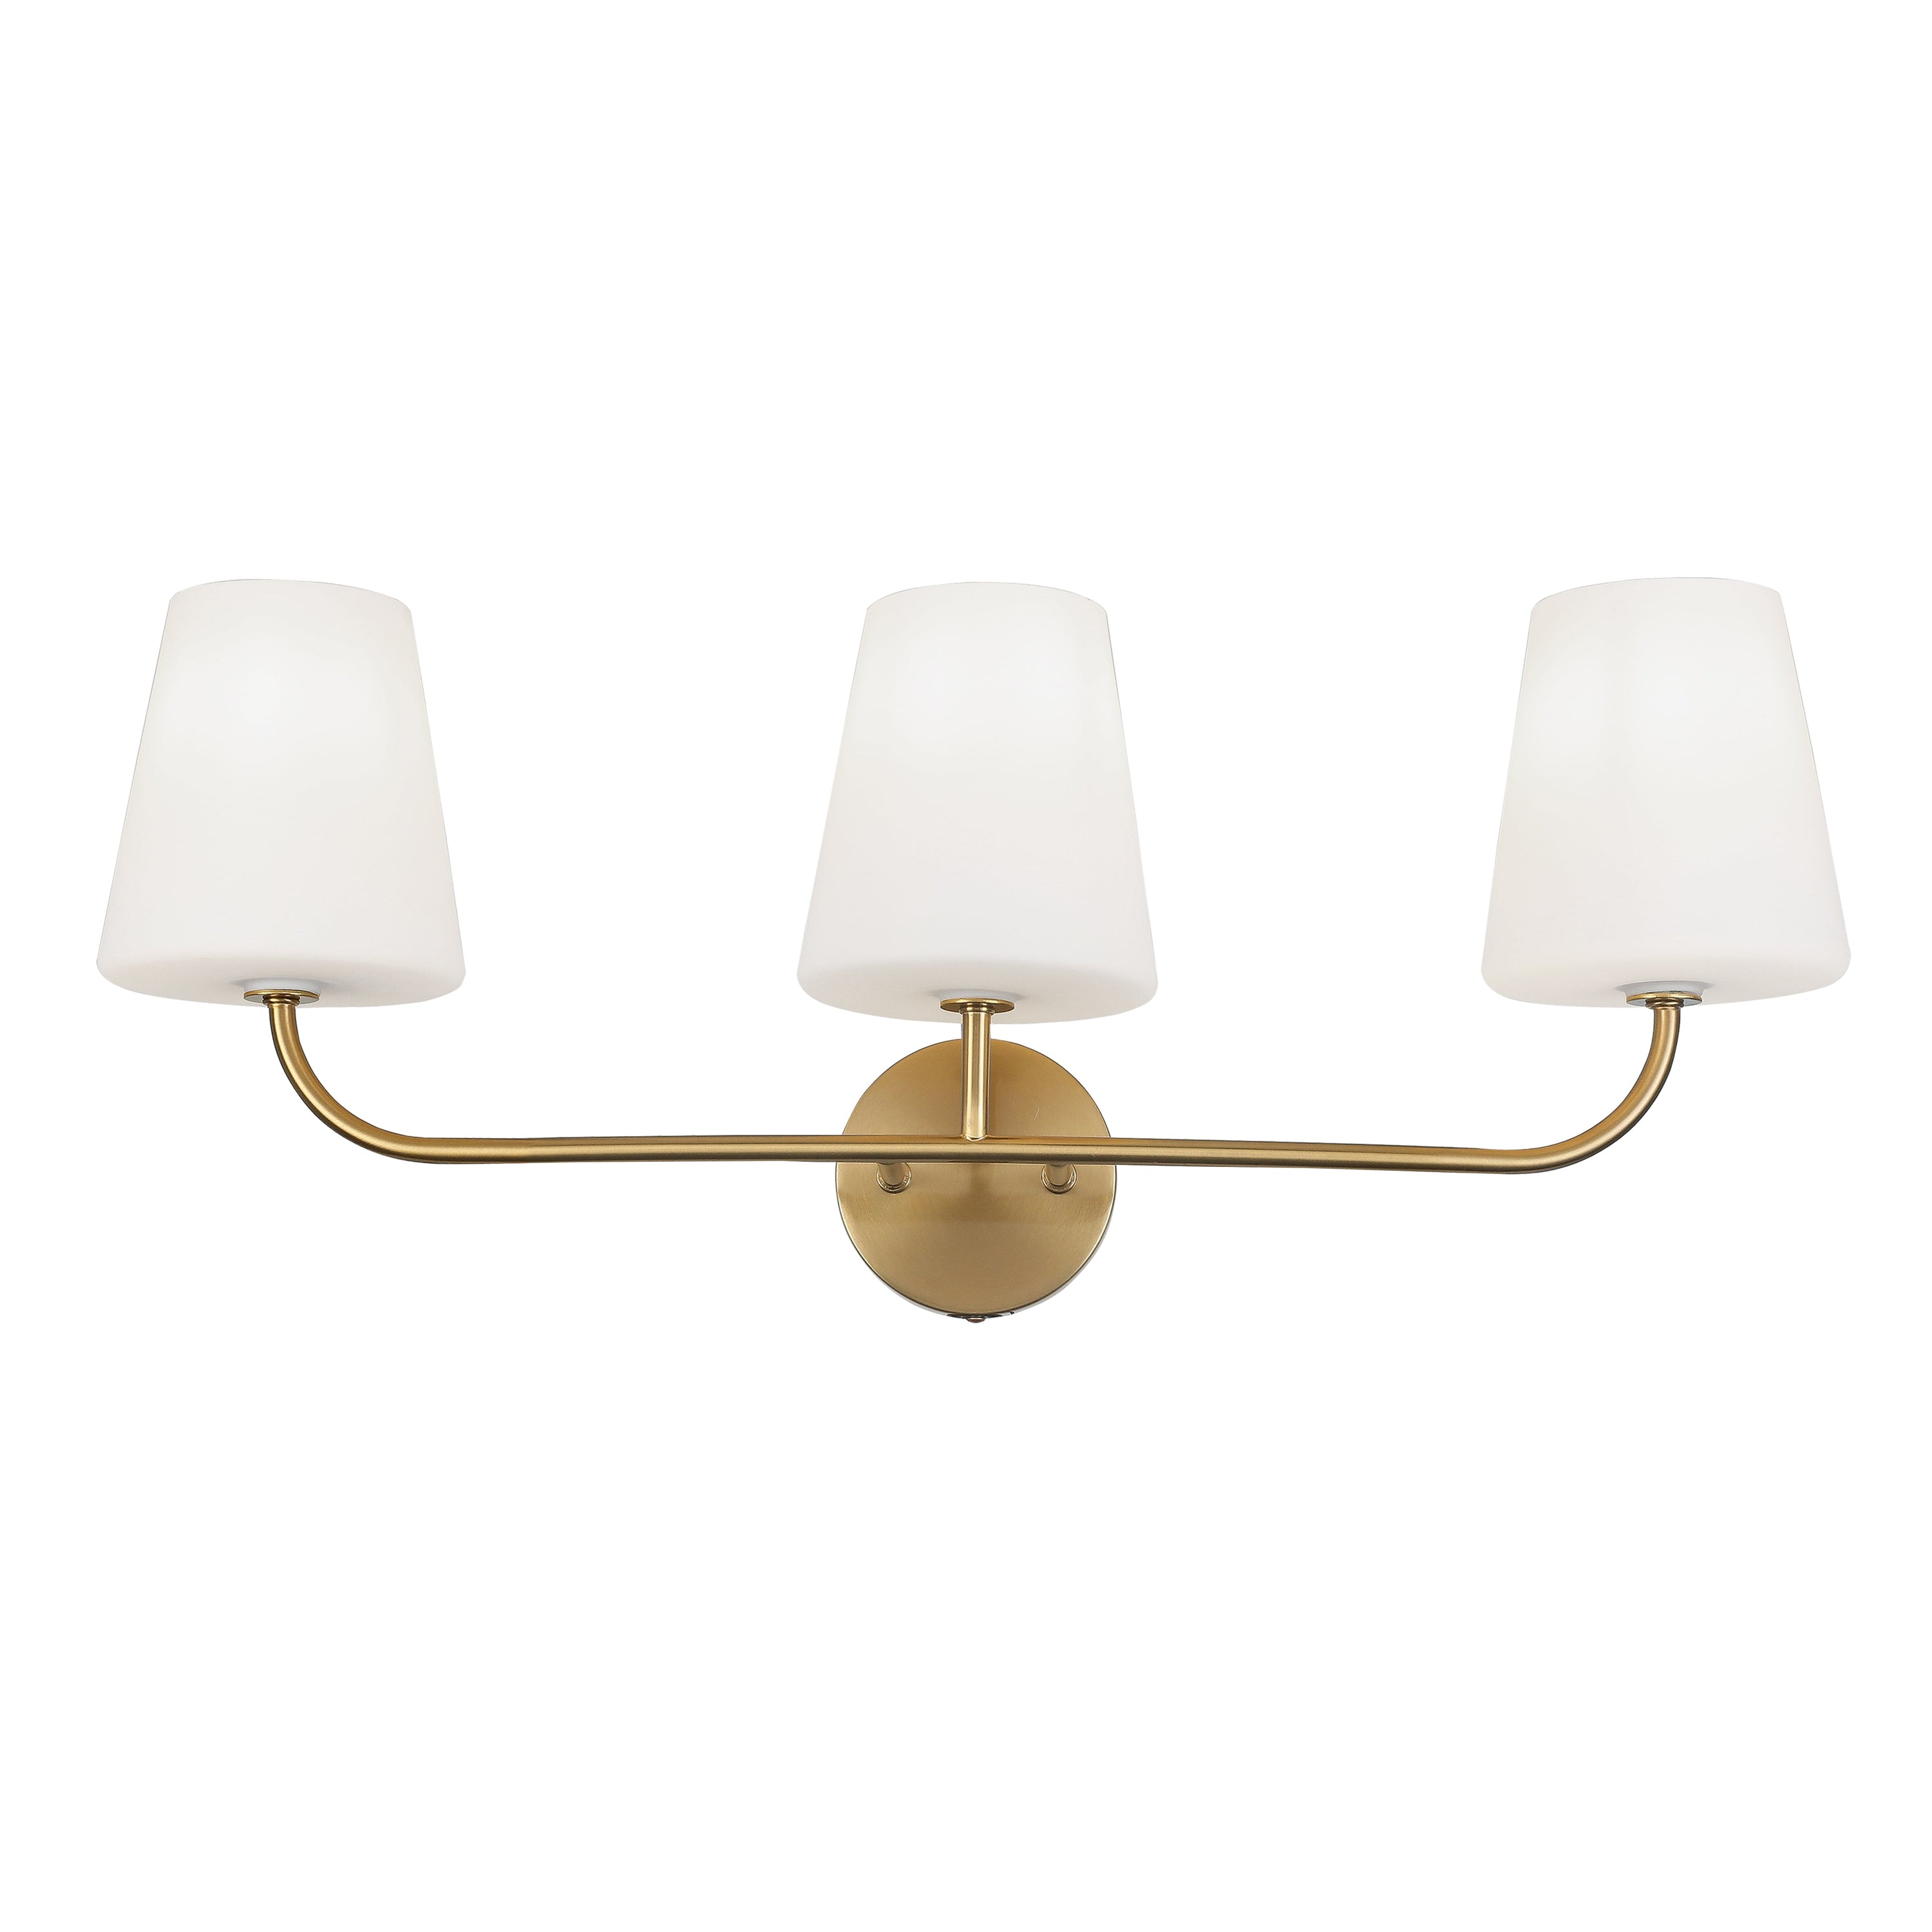 Dainolite Eleanor - ELN-213W-AGB-WH - 3 Light Vanity Fixture Aged Brass with White Opal Glass - Aged Brass